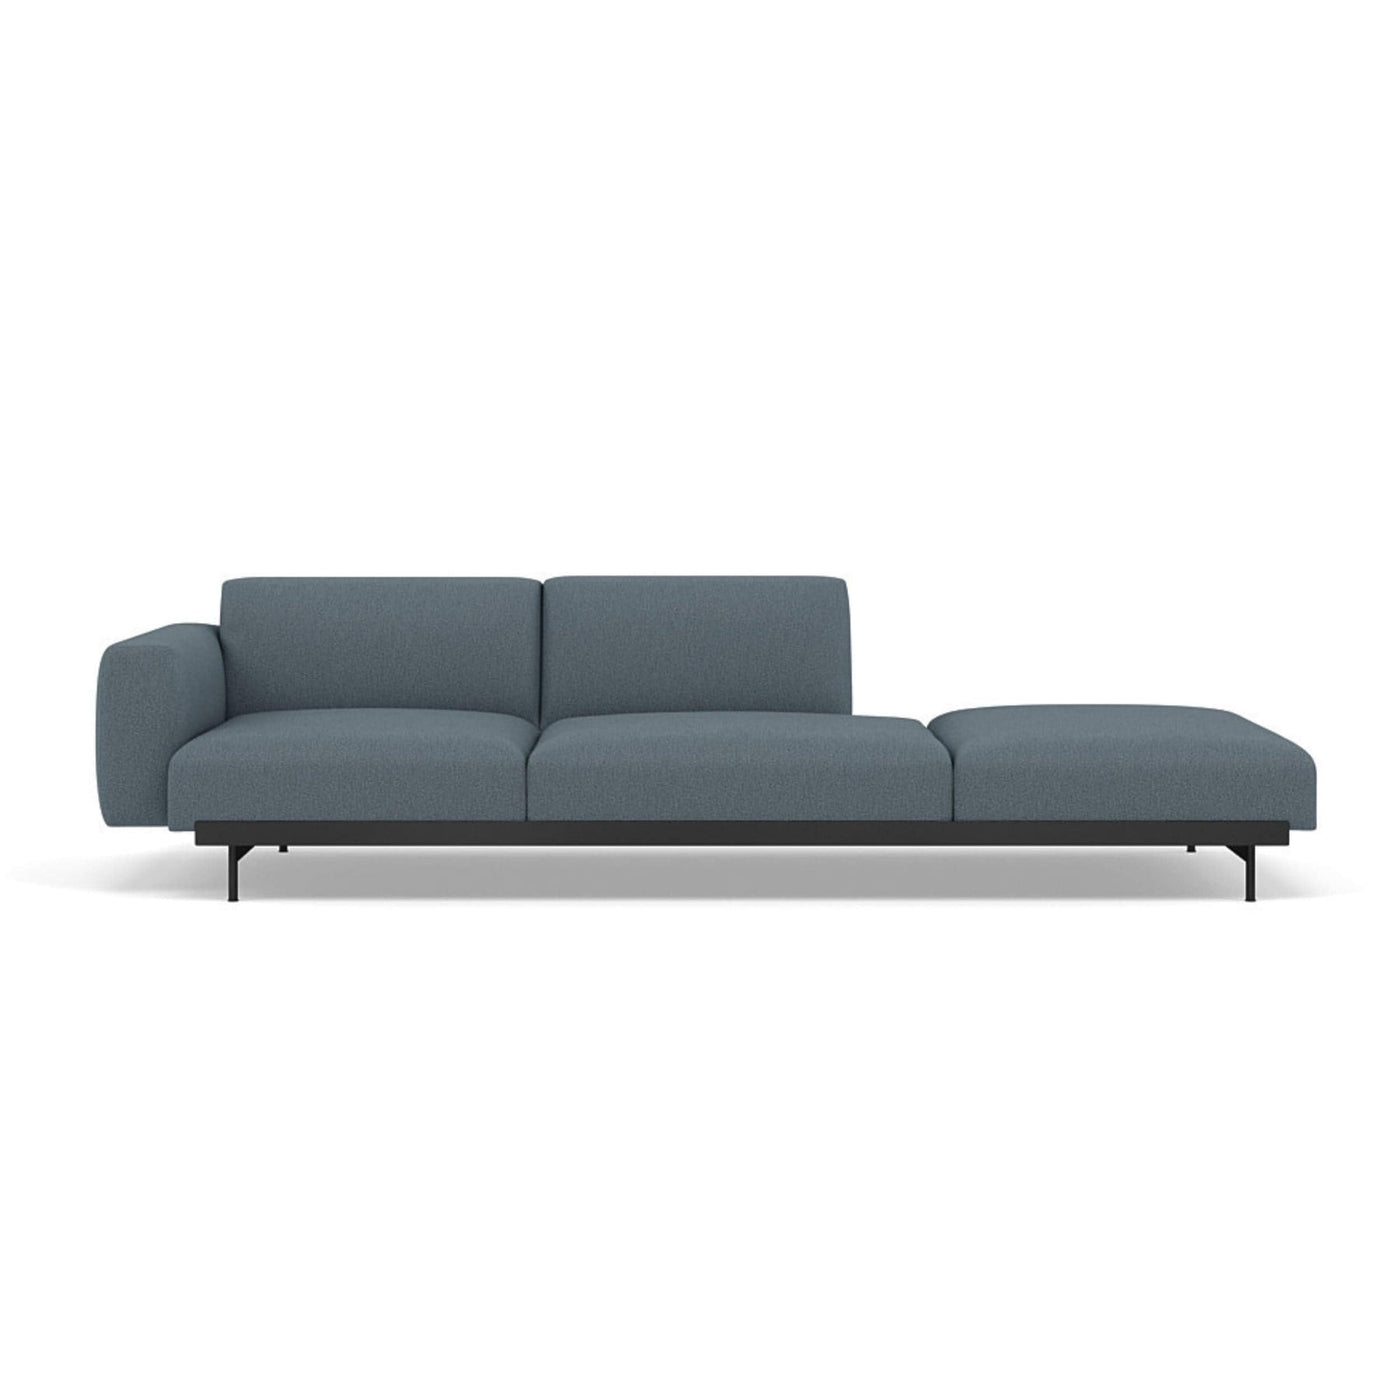 Muuto In Situ Sofa 3 seater configuration 5 in clay 1 fabric. Made to order at someday designs. #colour_clay-1-blue